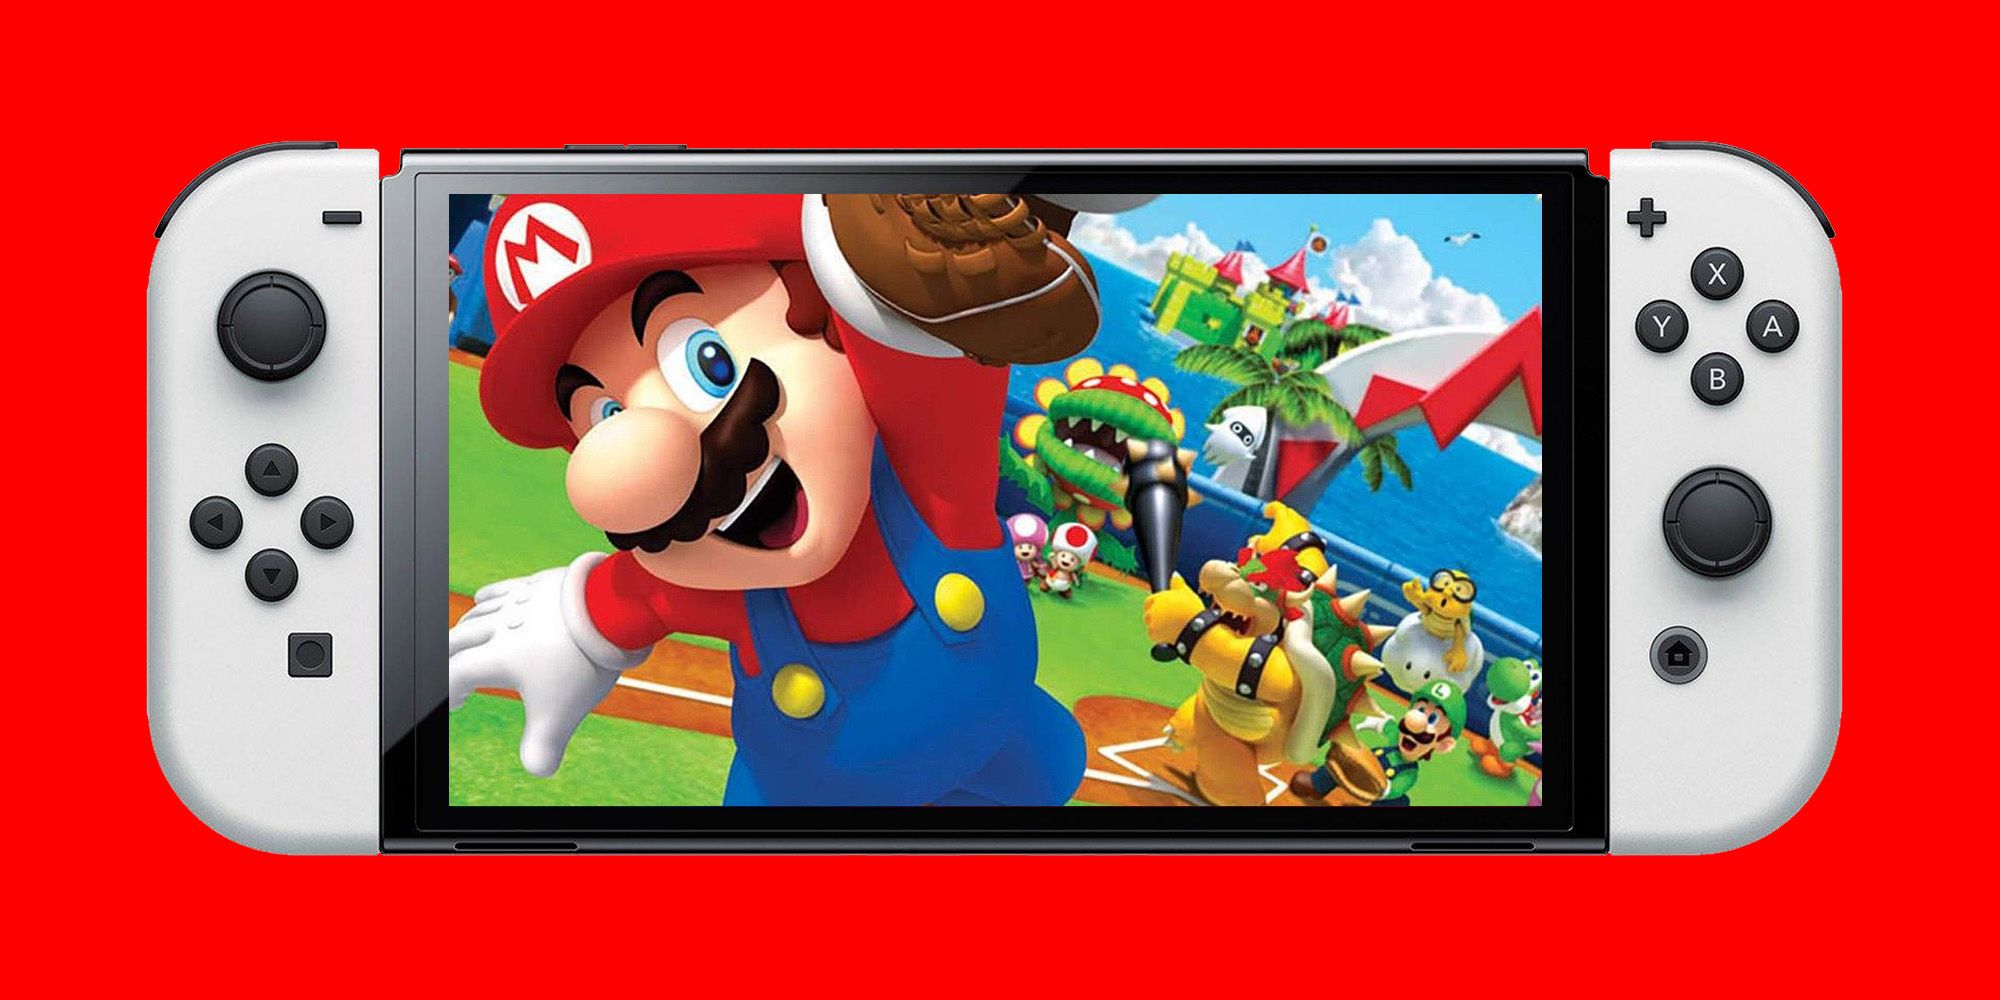 An image from Mario Super Sluggers superimposed onto a Nintendo Switch screen, with a red background.